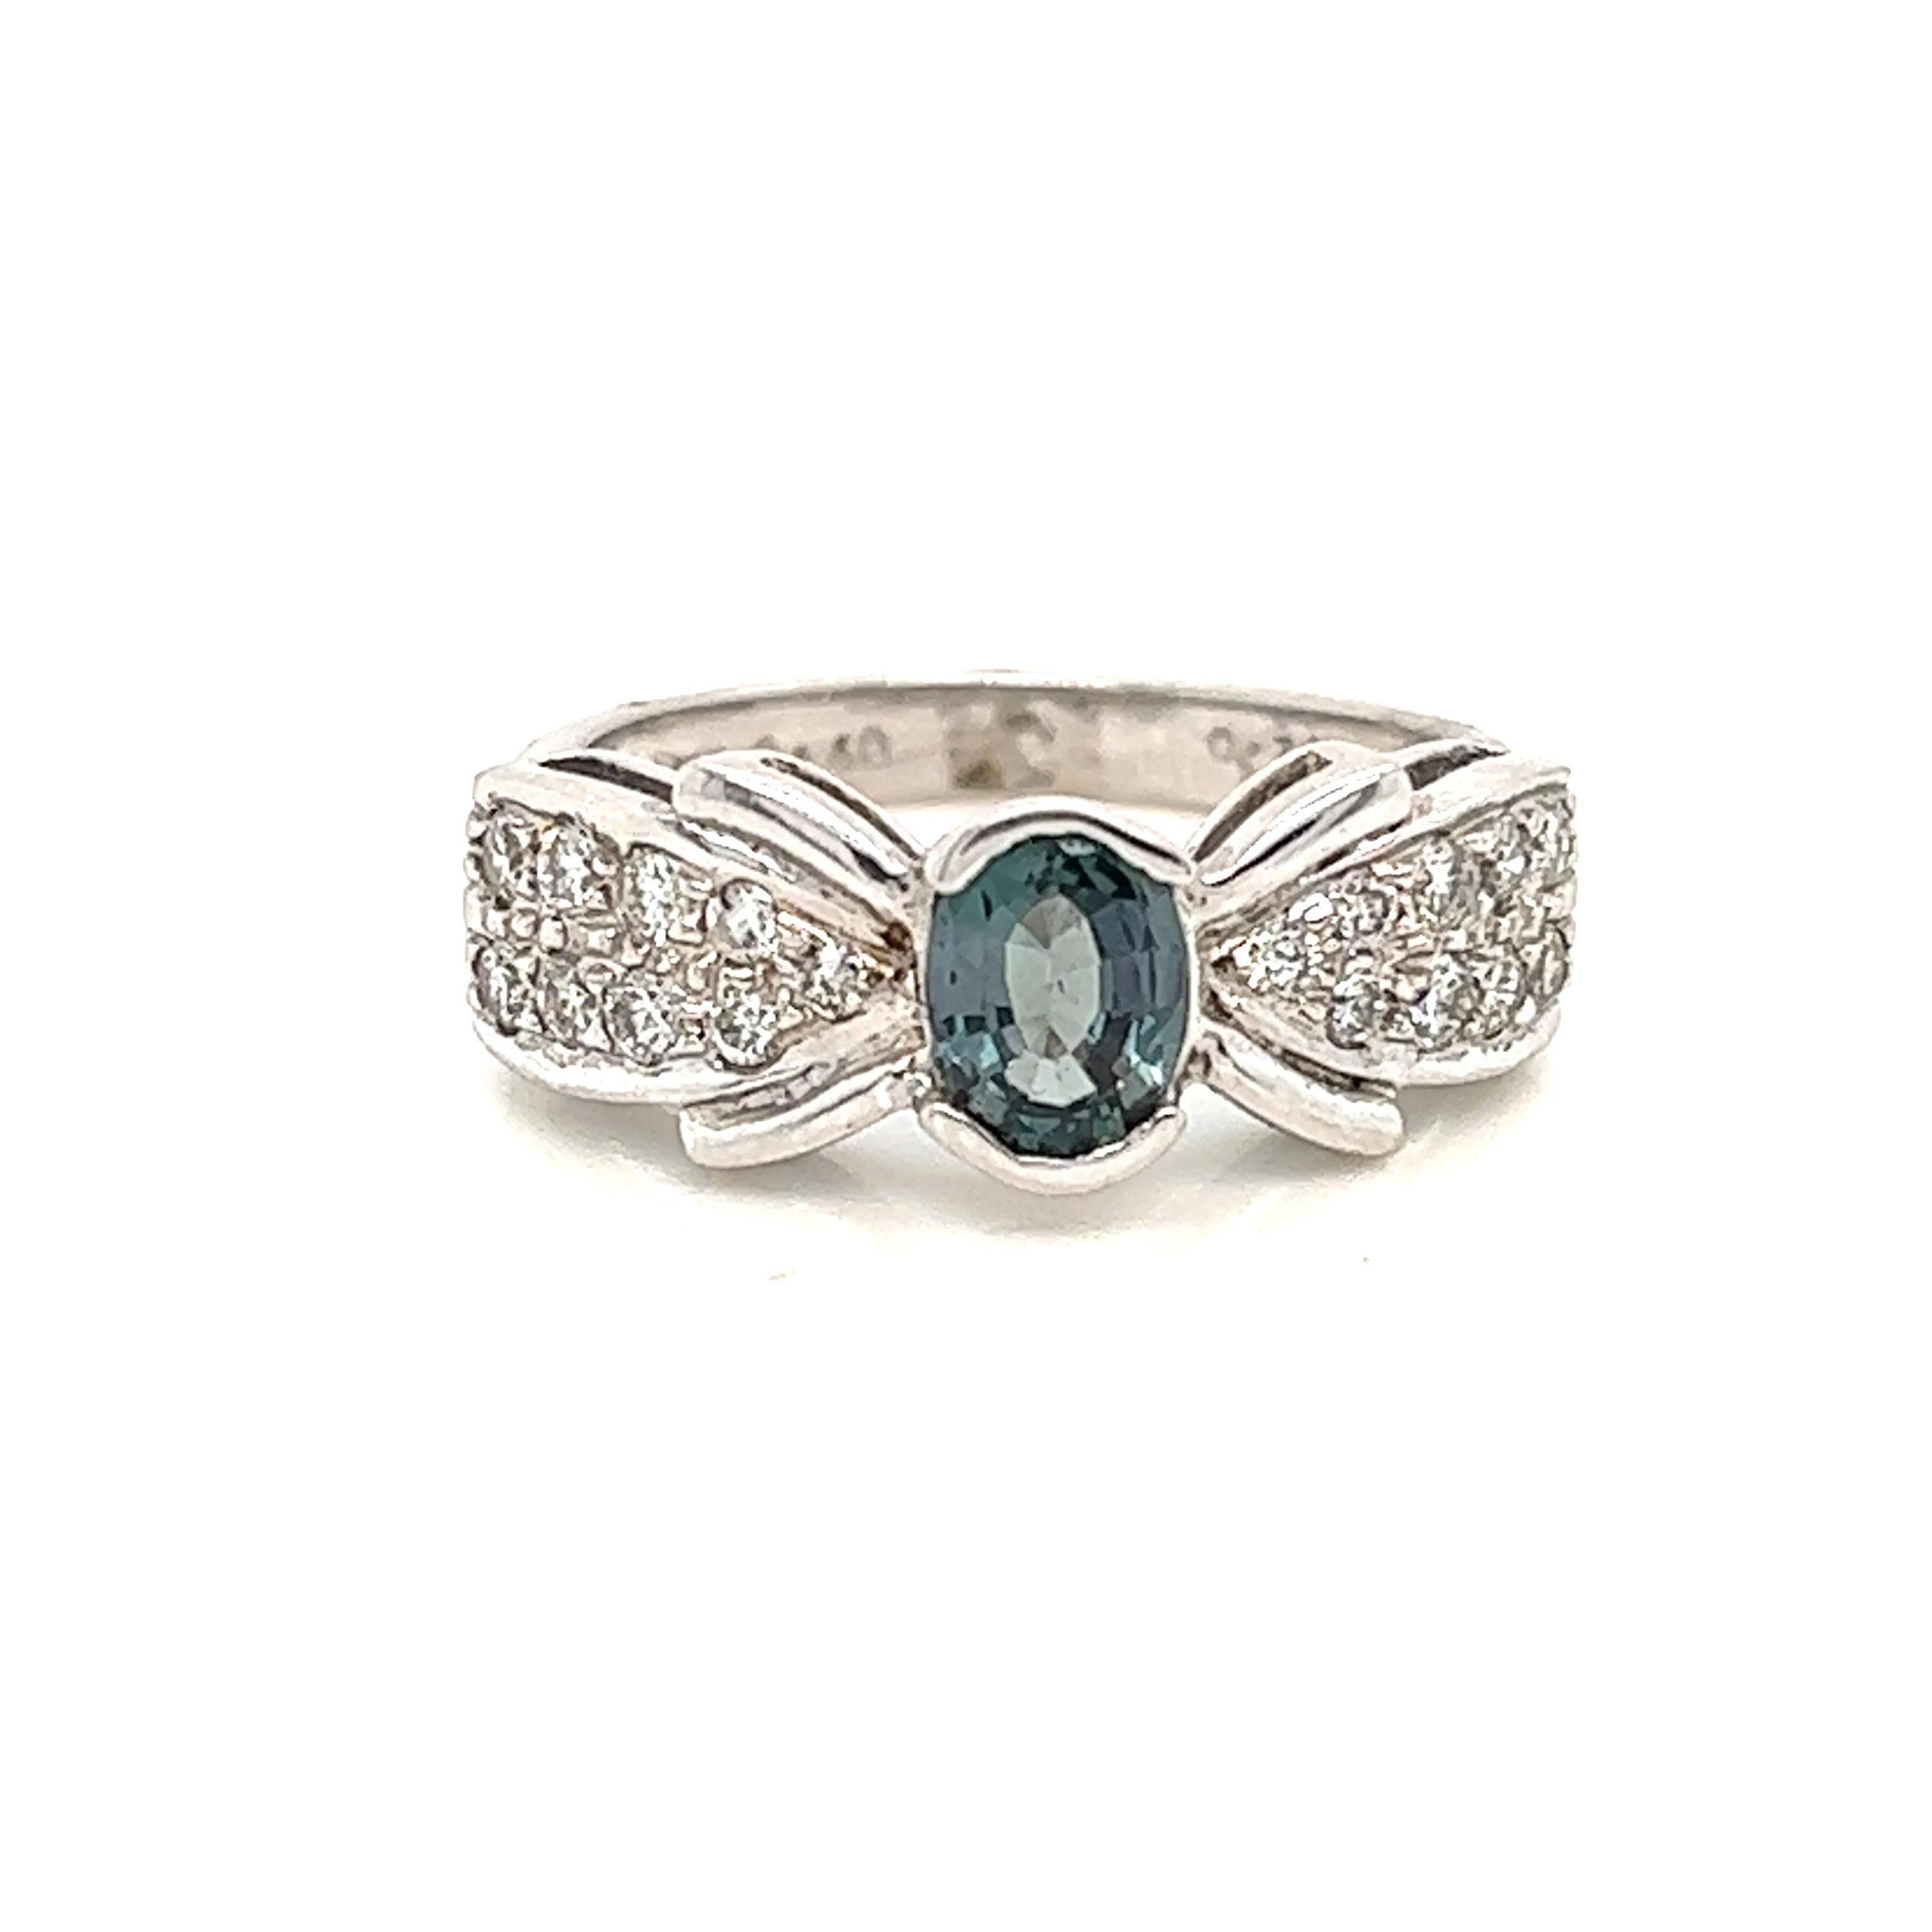 This is a gorgeous natural AAA quality oval Alexandrite surrounded by dainty diamonds that are set in a vintage white gold setting. This ring features a natural 0.68 carat oval alexandrite that is certified by the Gemological Institute of America